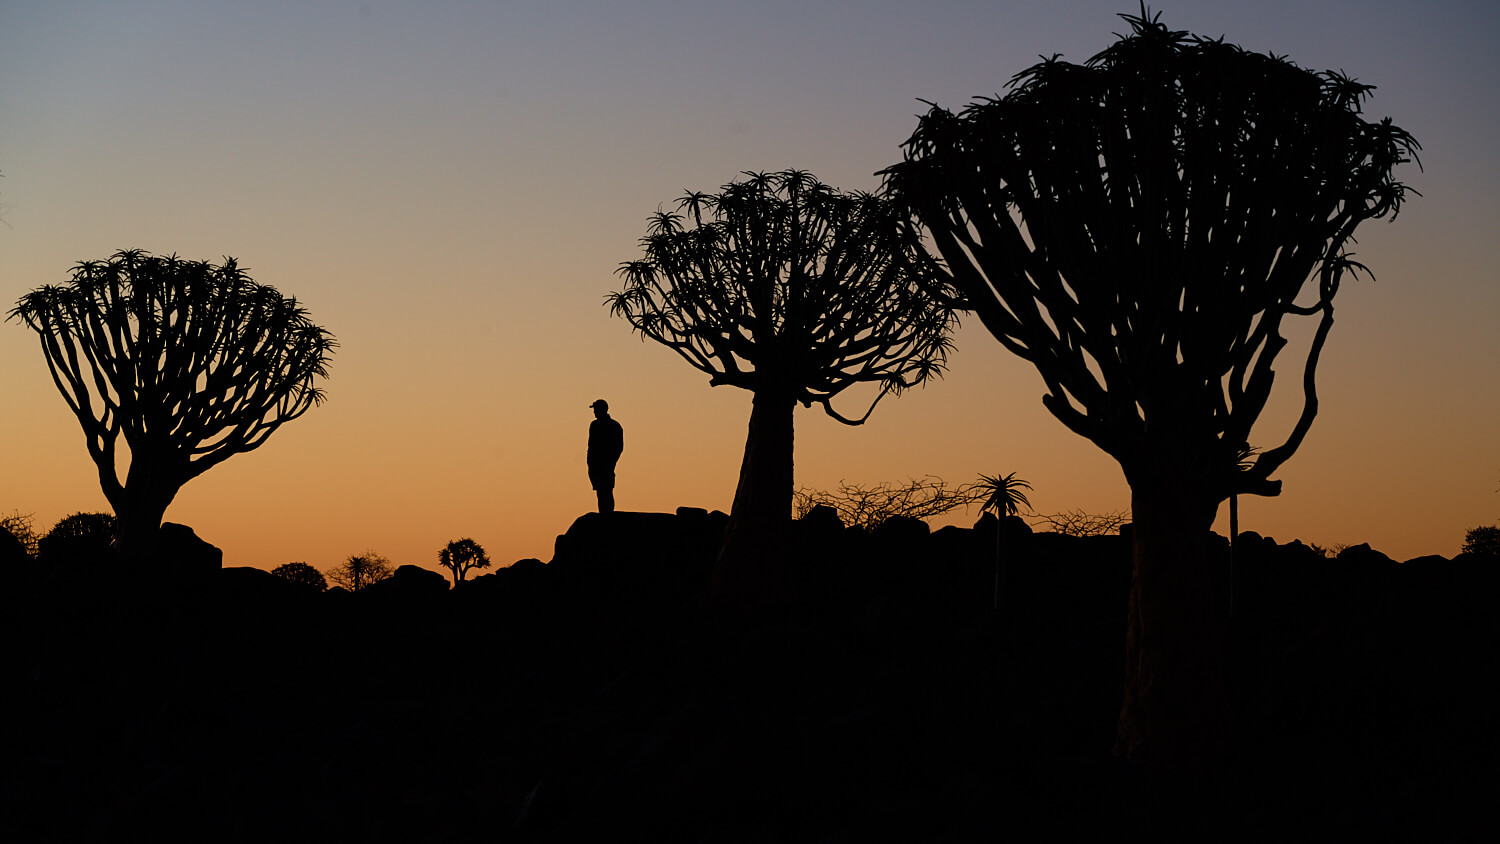 The picture shows the silhouette of a man standing in the Quivertree Forest during sunset